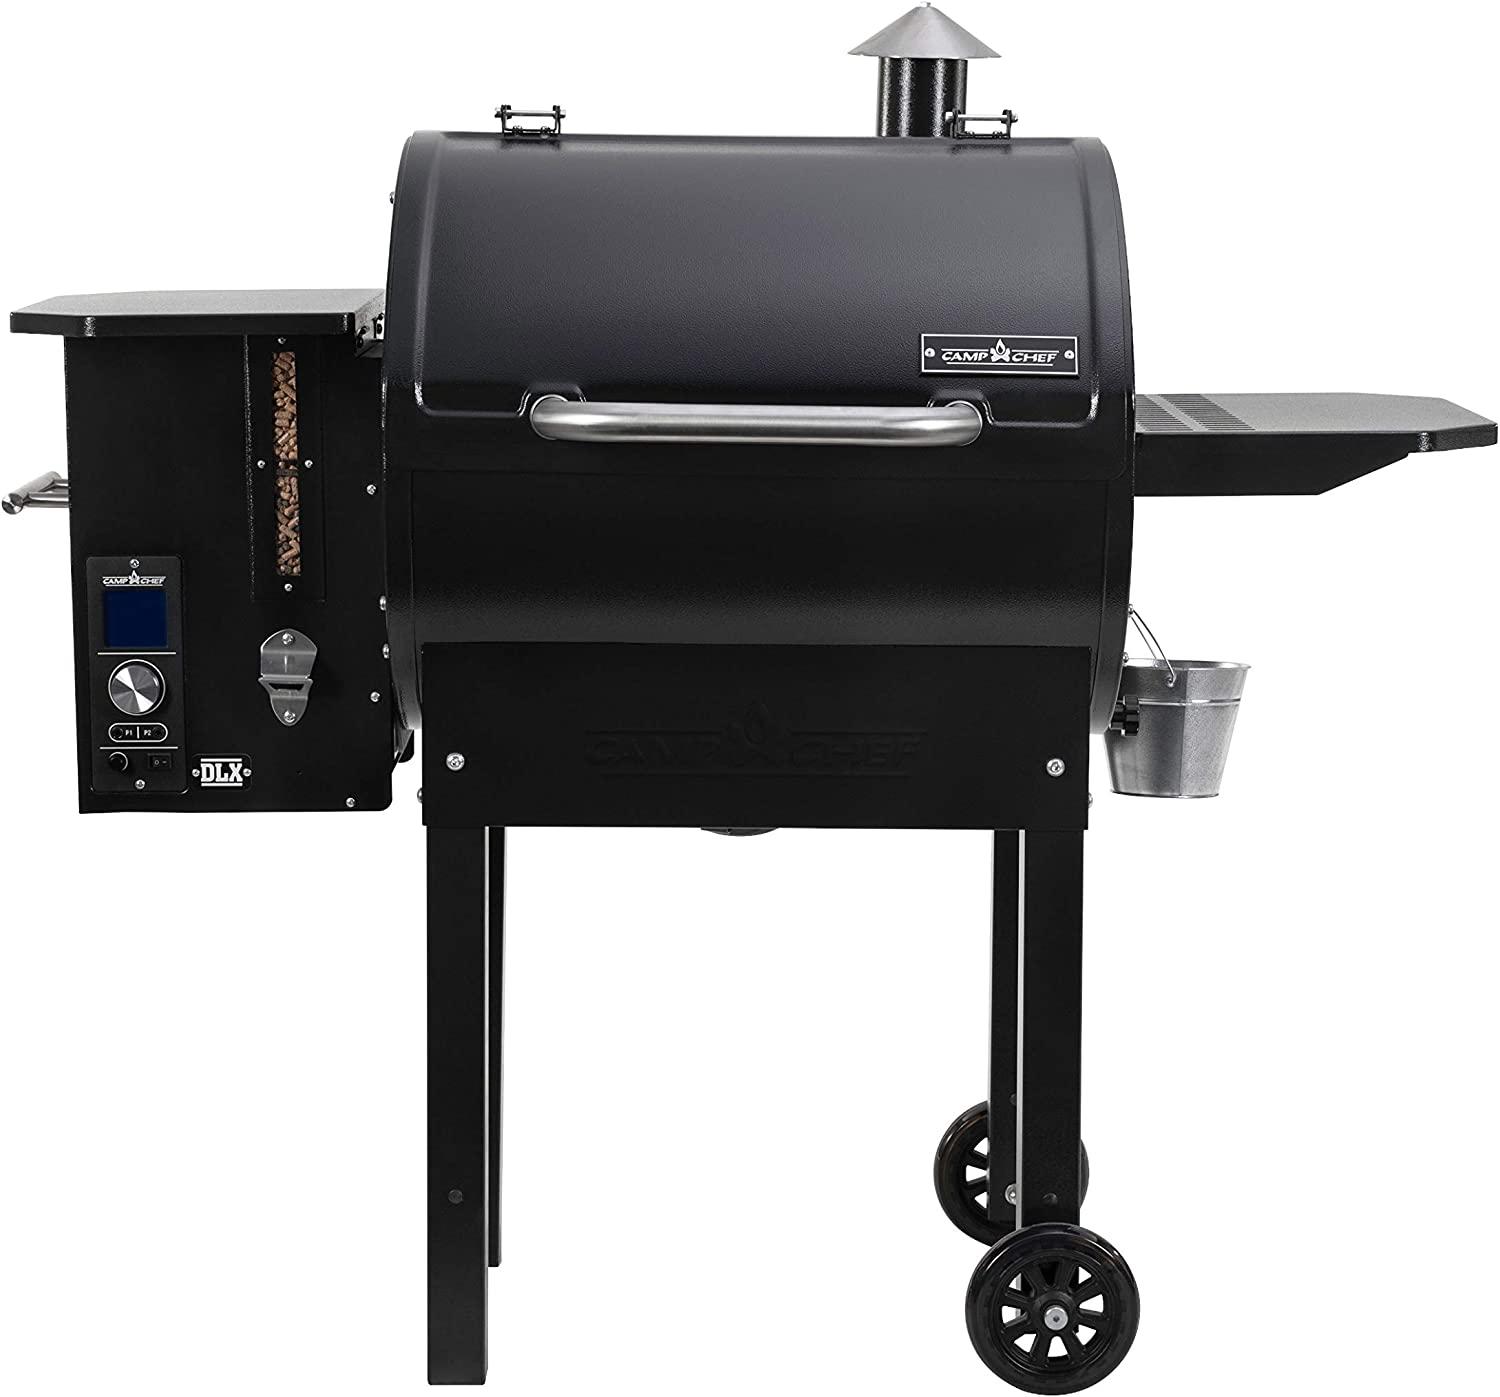 Camp Chef SmokePro Deluxe Pellet Grill and Smoker for $379.99 Shipped